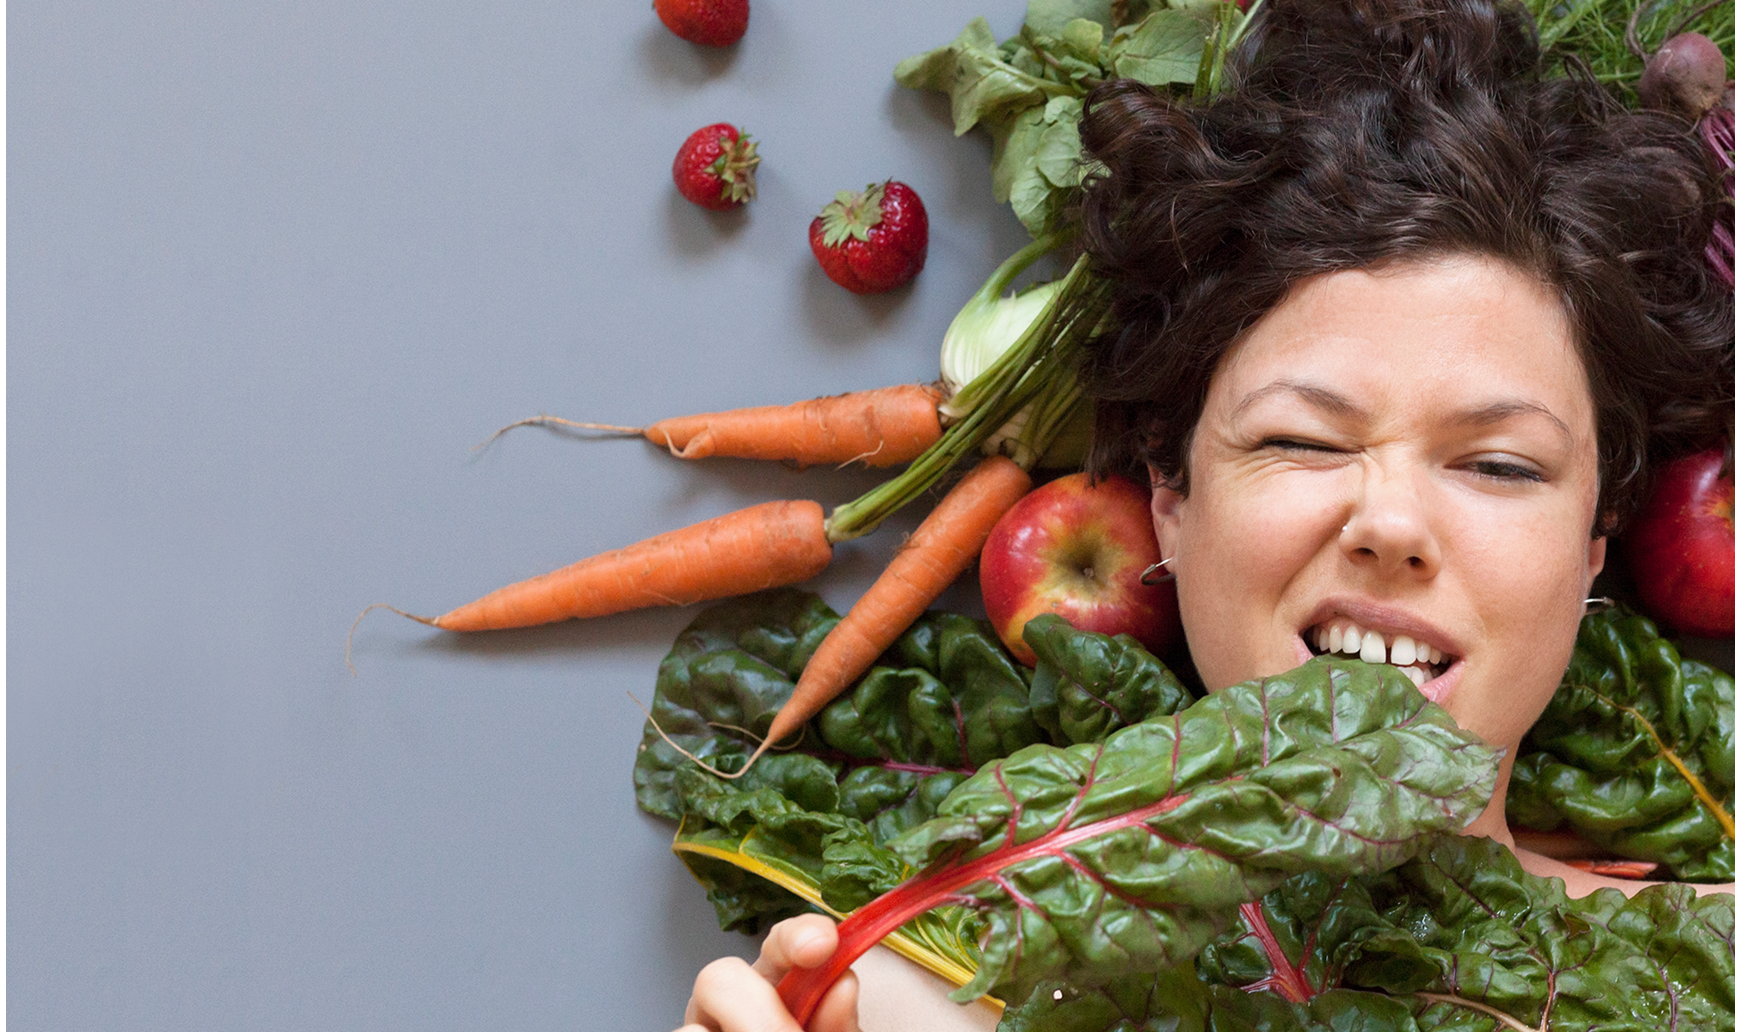 A woman eating vegetables